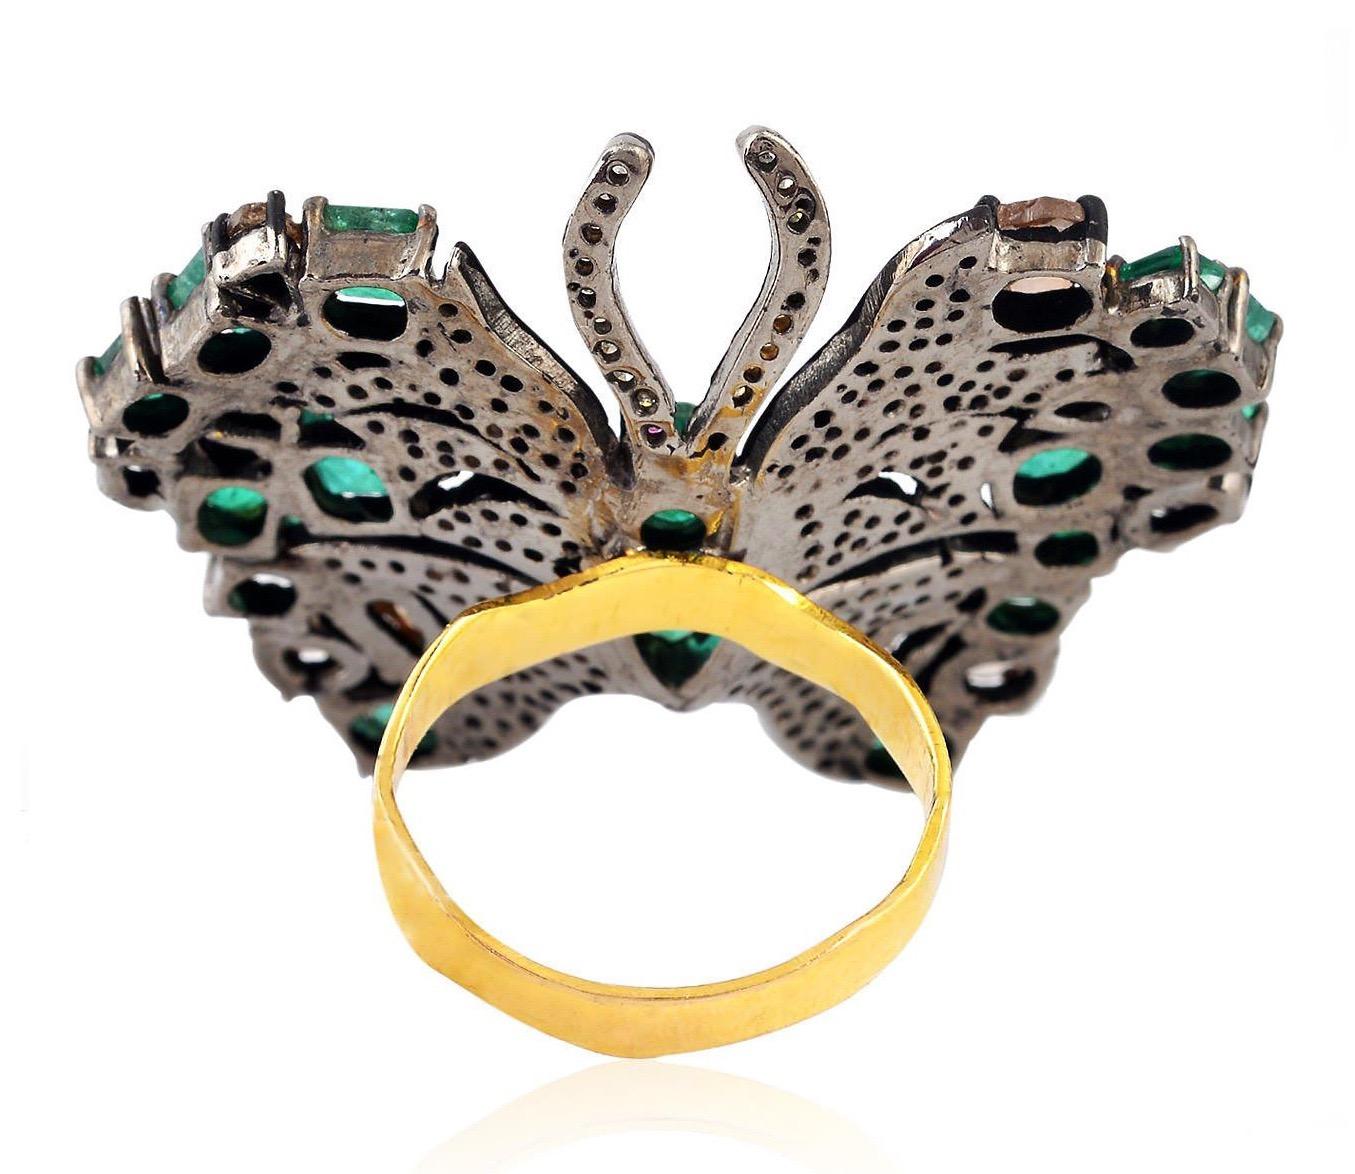 This stunning ring has been meticulously crafted from 14-karat gold & sterling silver with blackened finish. Handcrafted with 4.92 carats emerald and illuminated with 2.96 carats glimmering diamonds. 

The ring is a size 7 and may be resized to